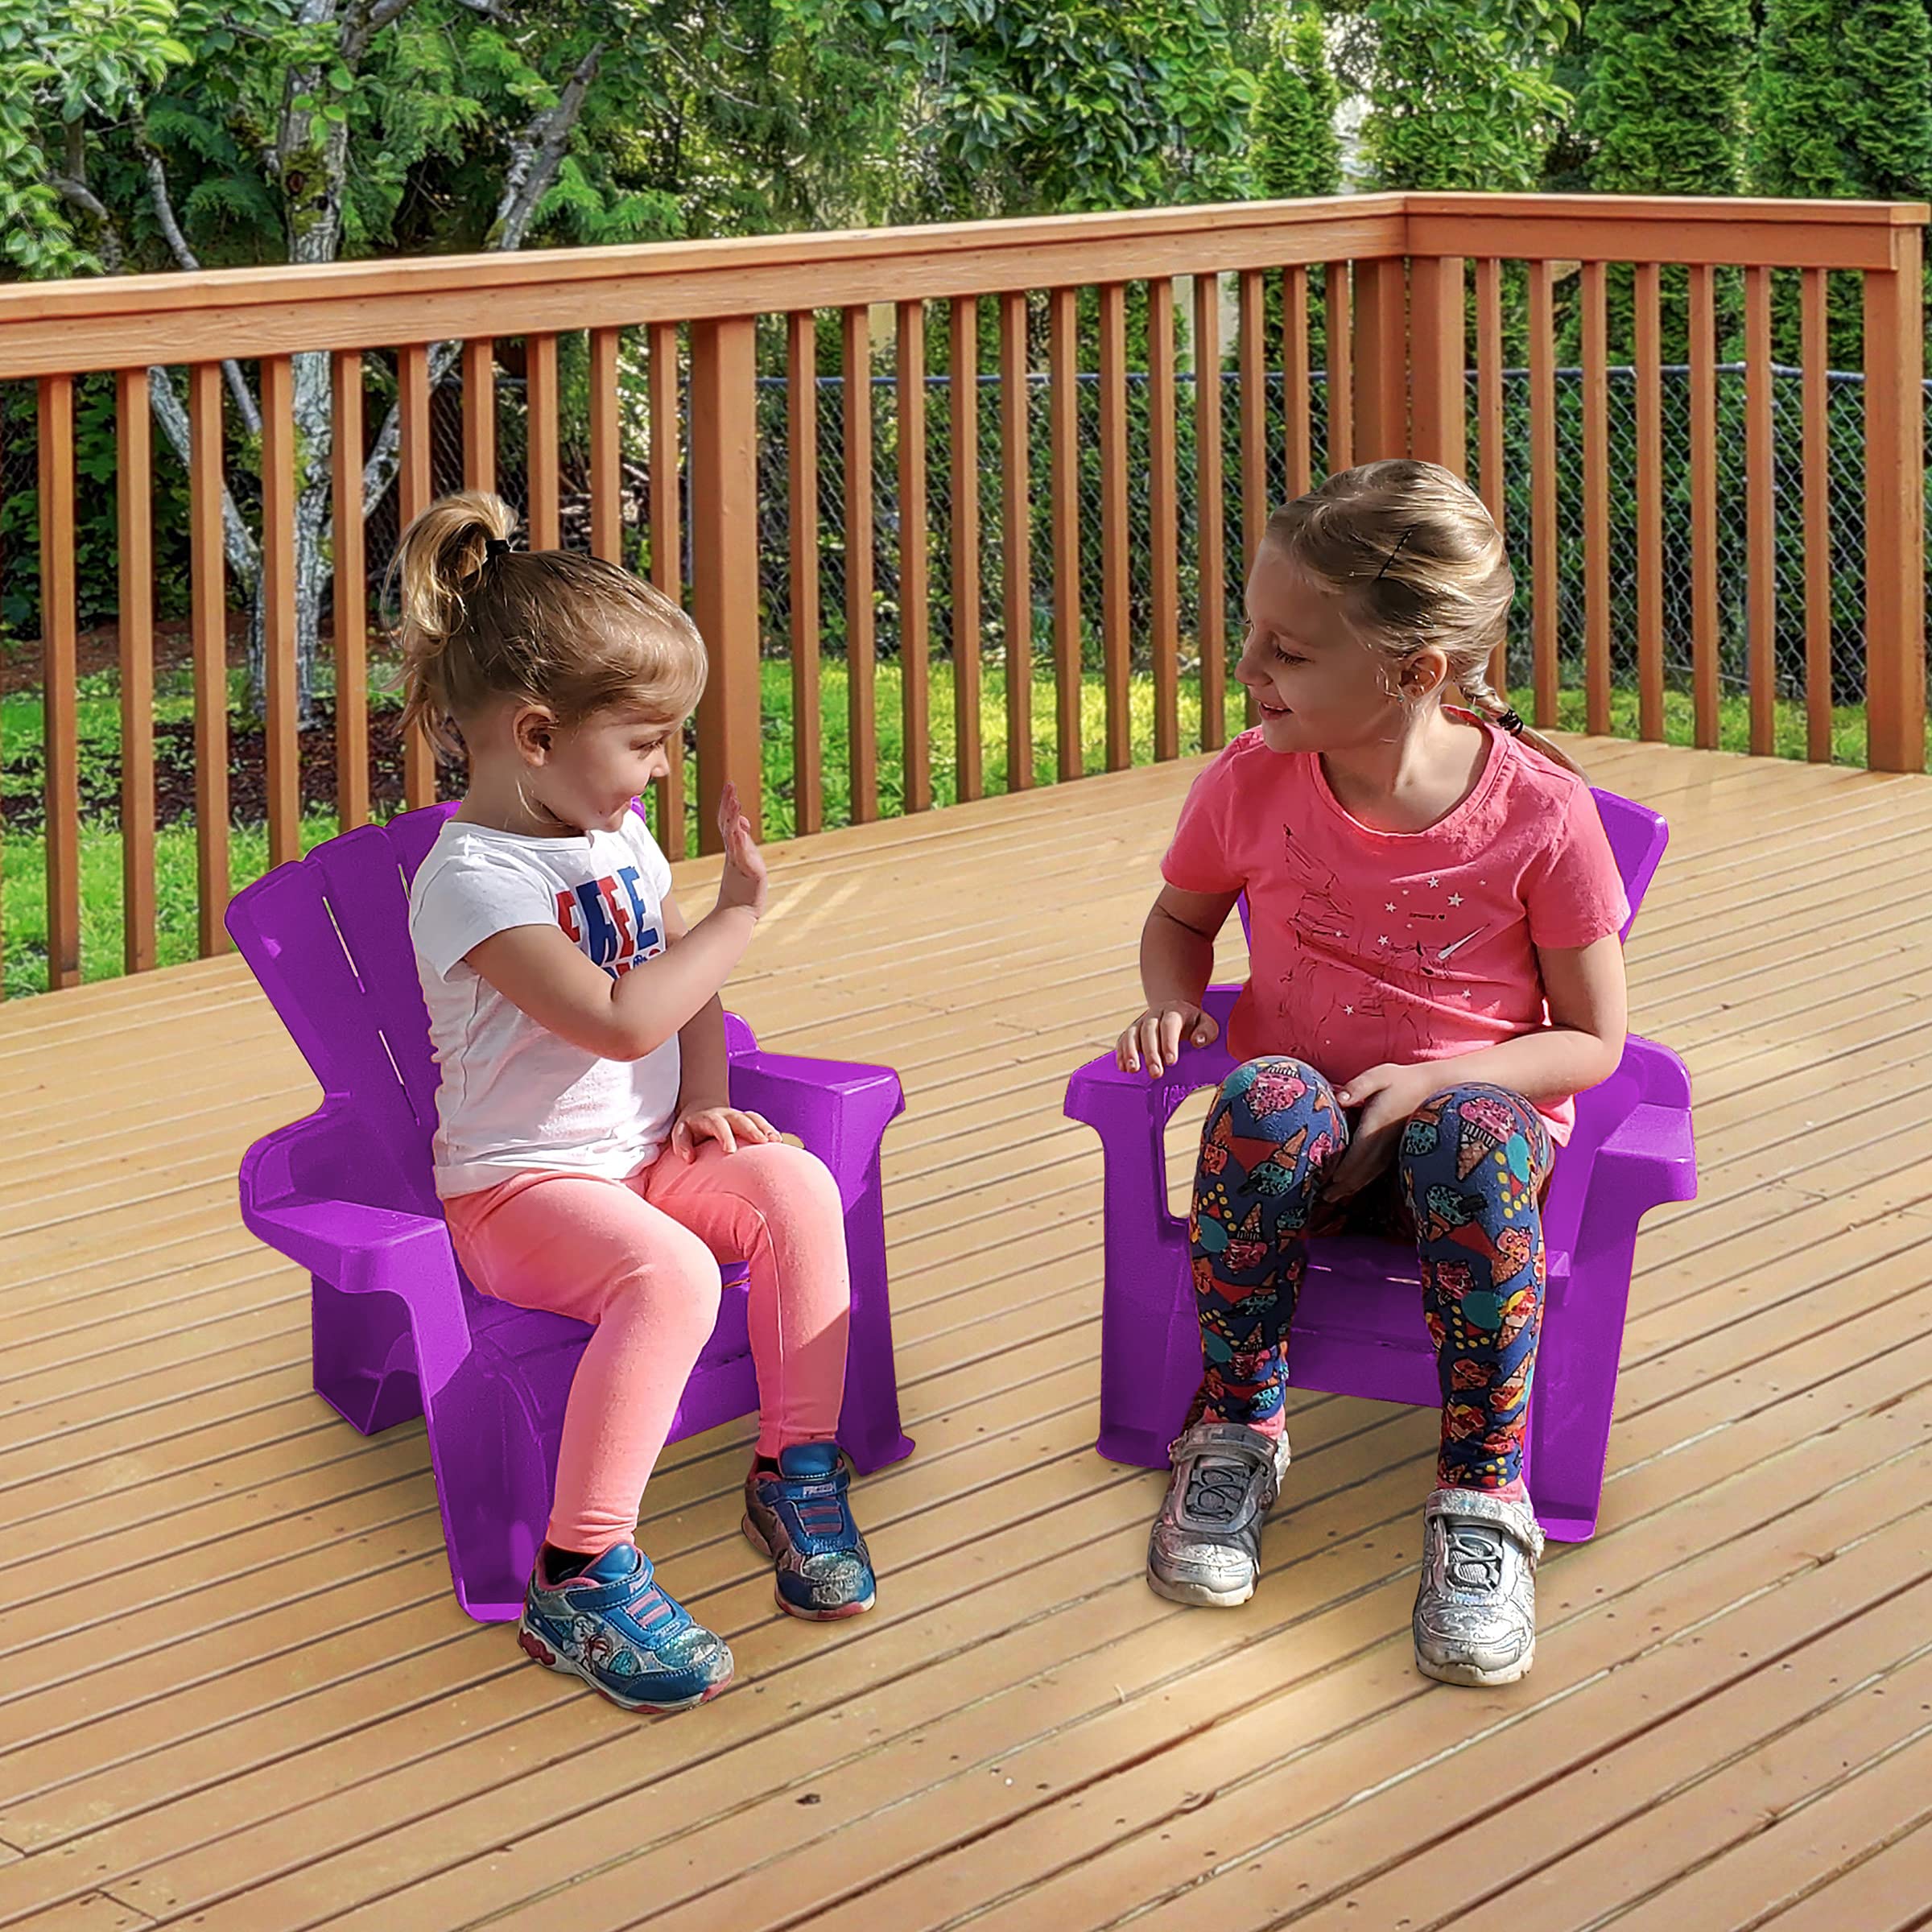 American Plastic Toys Kids’ Adirondack (2-Pack, Purple), Stackable, Outdoor, Beach, Lawn, Indoor, Lightweight, Portable, Wide Armrests, Comfortable Lounge Chairs for Children